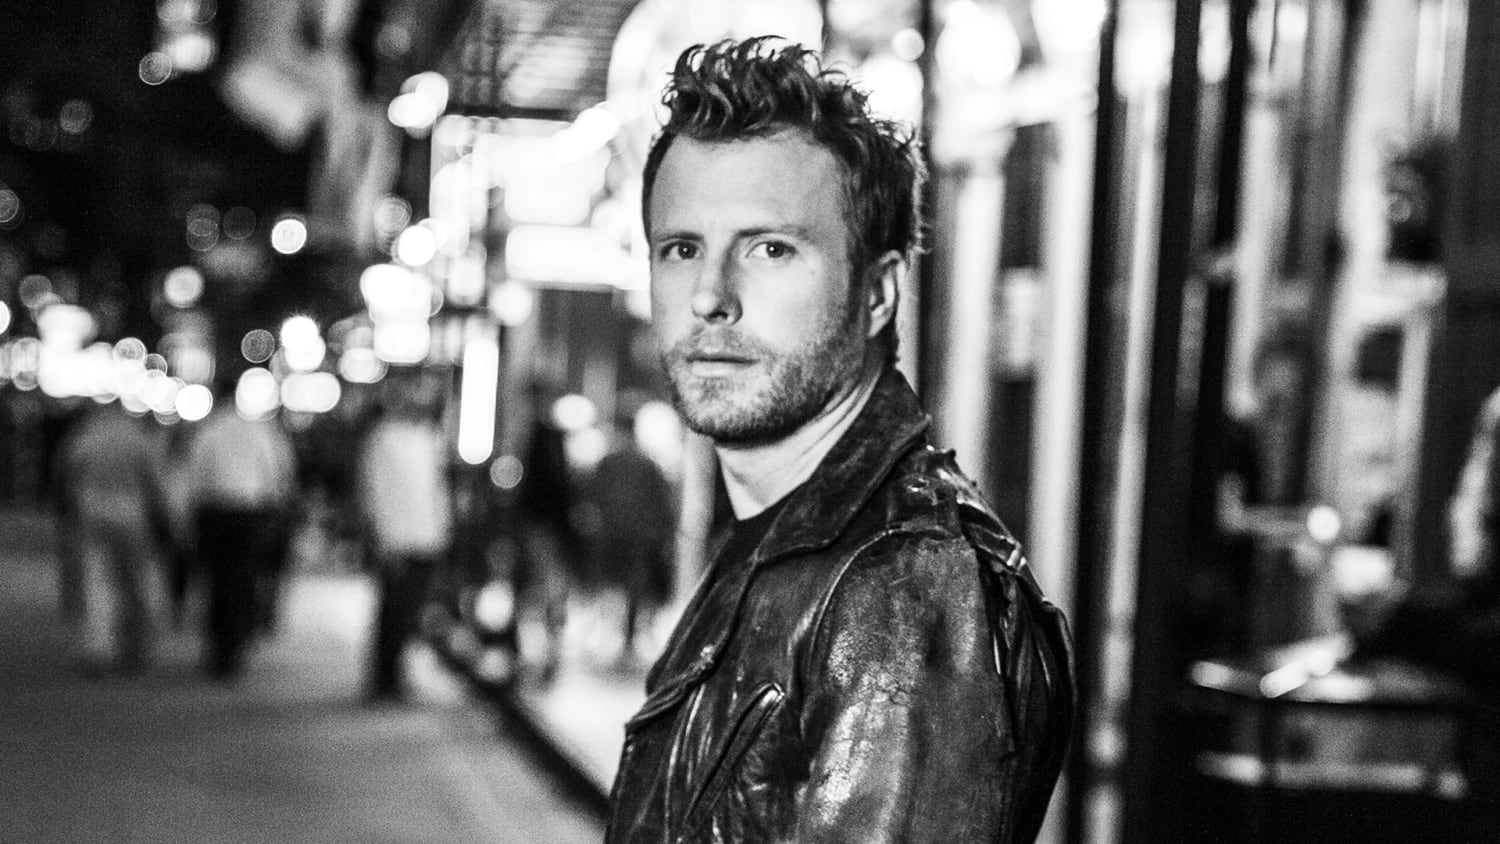 Dierks Bentley TODAY concert: What you need to know.